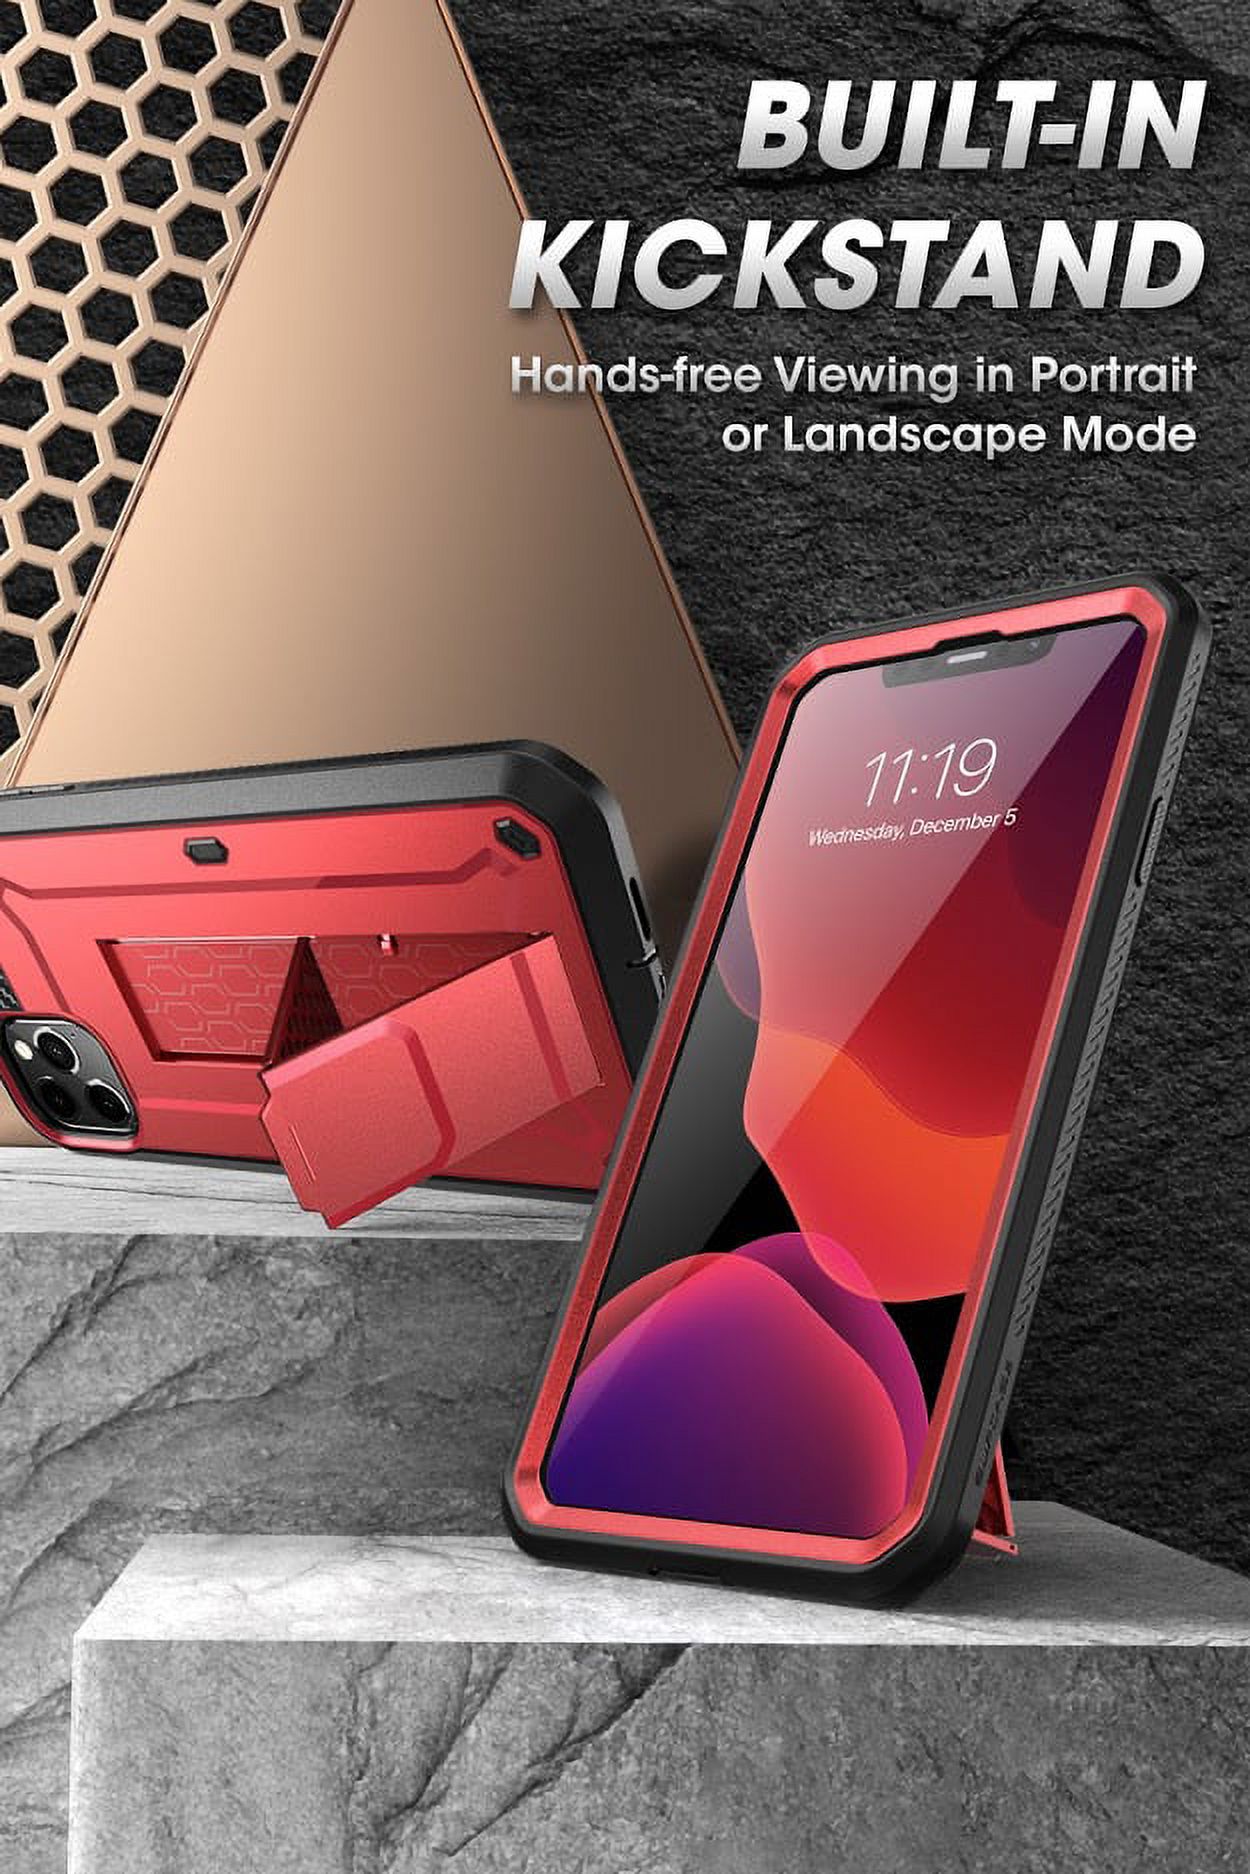 SUPCASE Unicorn Beetle Pro Series Case Designed for iPhone 11 Pro 5.8 Inch (2019 Release), Built-in Screen Protector Full-Body Rugged Holster Case (MetallicRed) - image 4 of 8